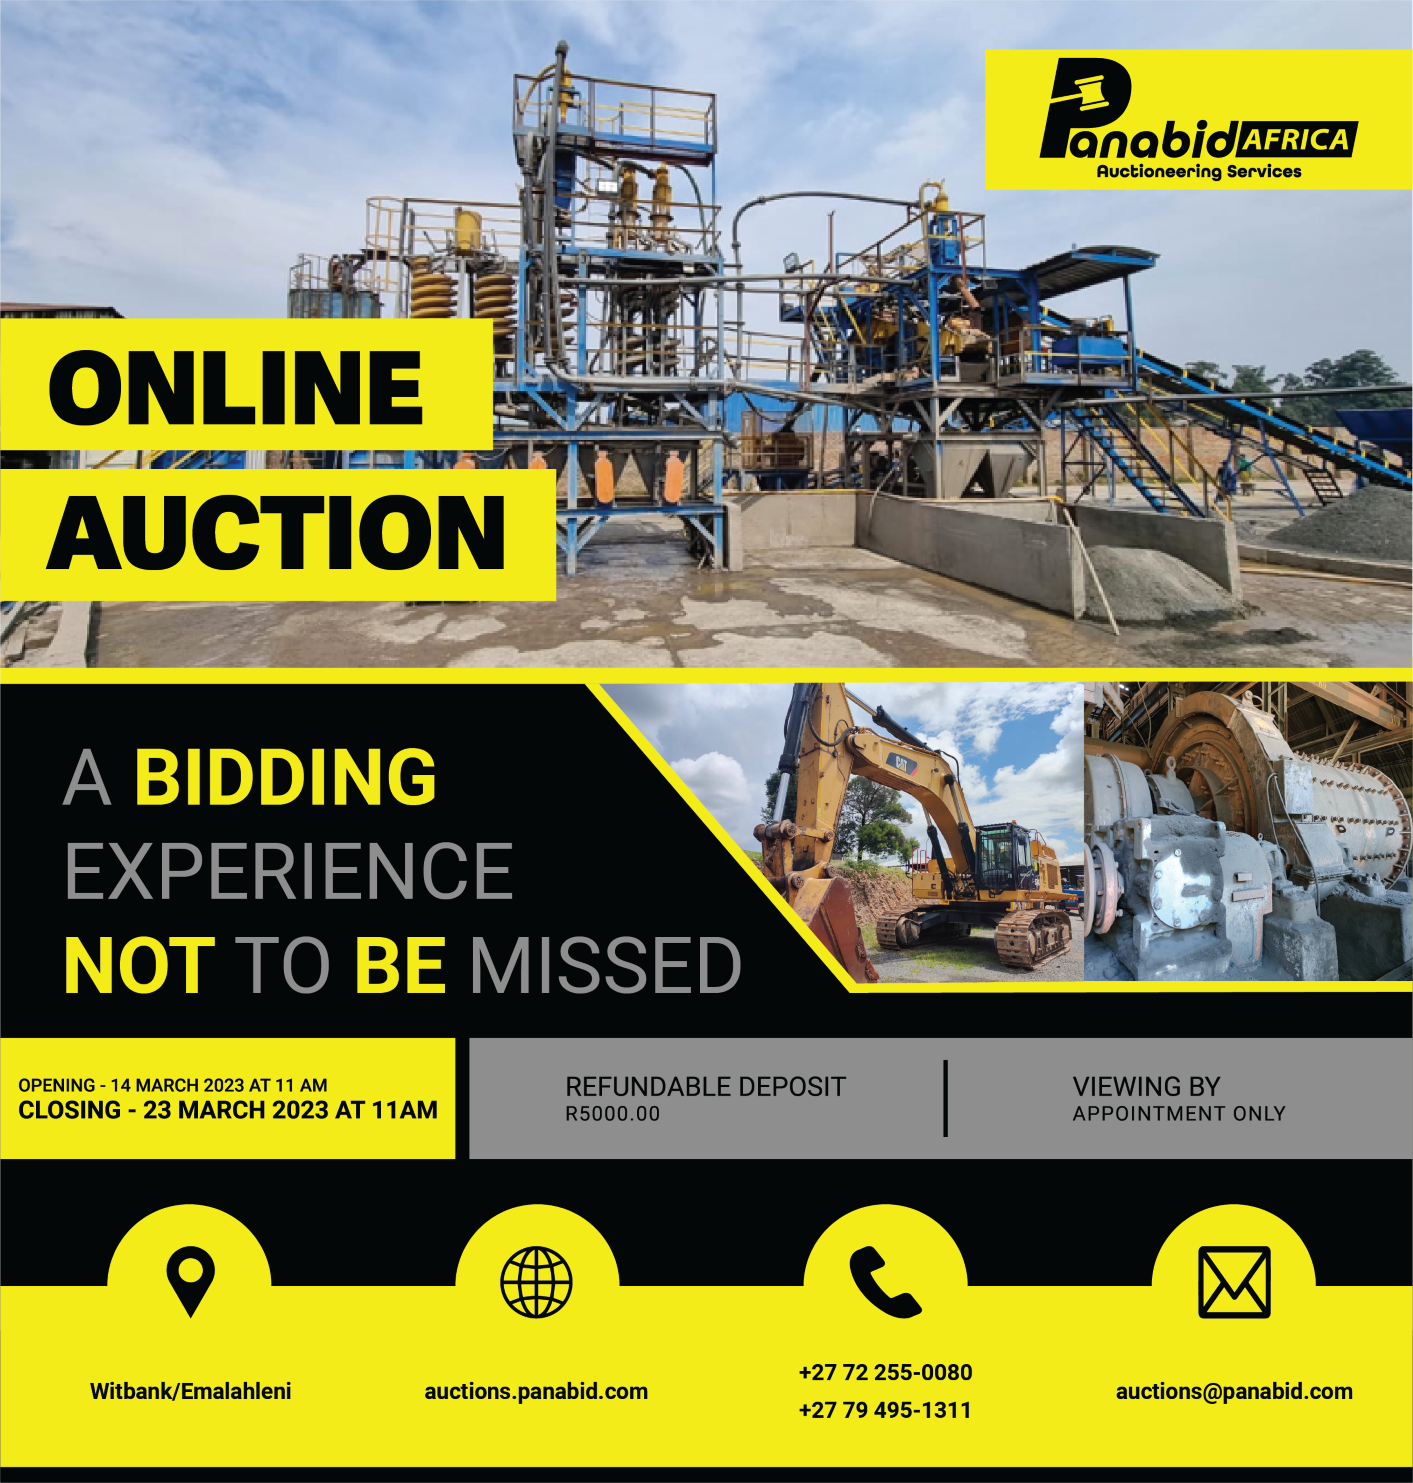 ONLINE AUCTION: INDUSTRIAL AND MINING OPERATIONS CLOSURE – CHROME RECOVERY CRUSHING/SCREENING JIG SEPARATOR PLANT, 800 KVA SOLAR PANEL SYSTEM, BALL MILLS, MOTORS, STEEL PIPES, STAINLESS STEEL, TRUCKS, LDVS, TRAILERS, EARTHMOVING EQUIPMENT AND MORE LOCATED IN WITBANK/EMALAHLENI